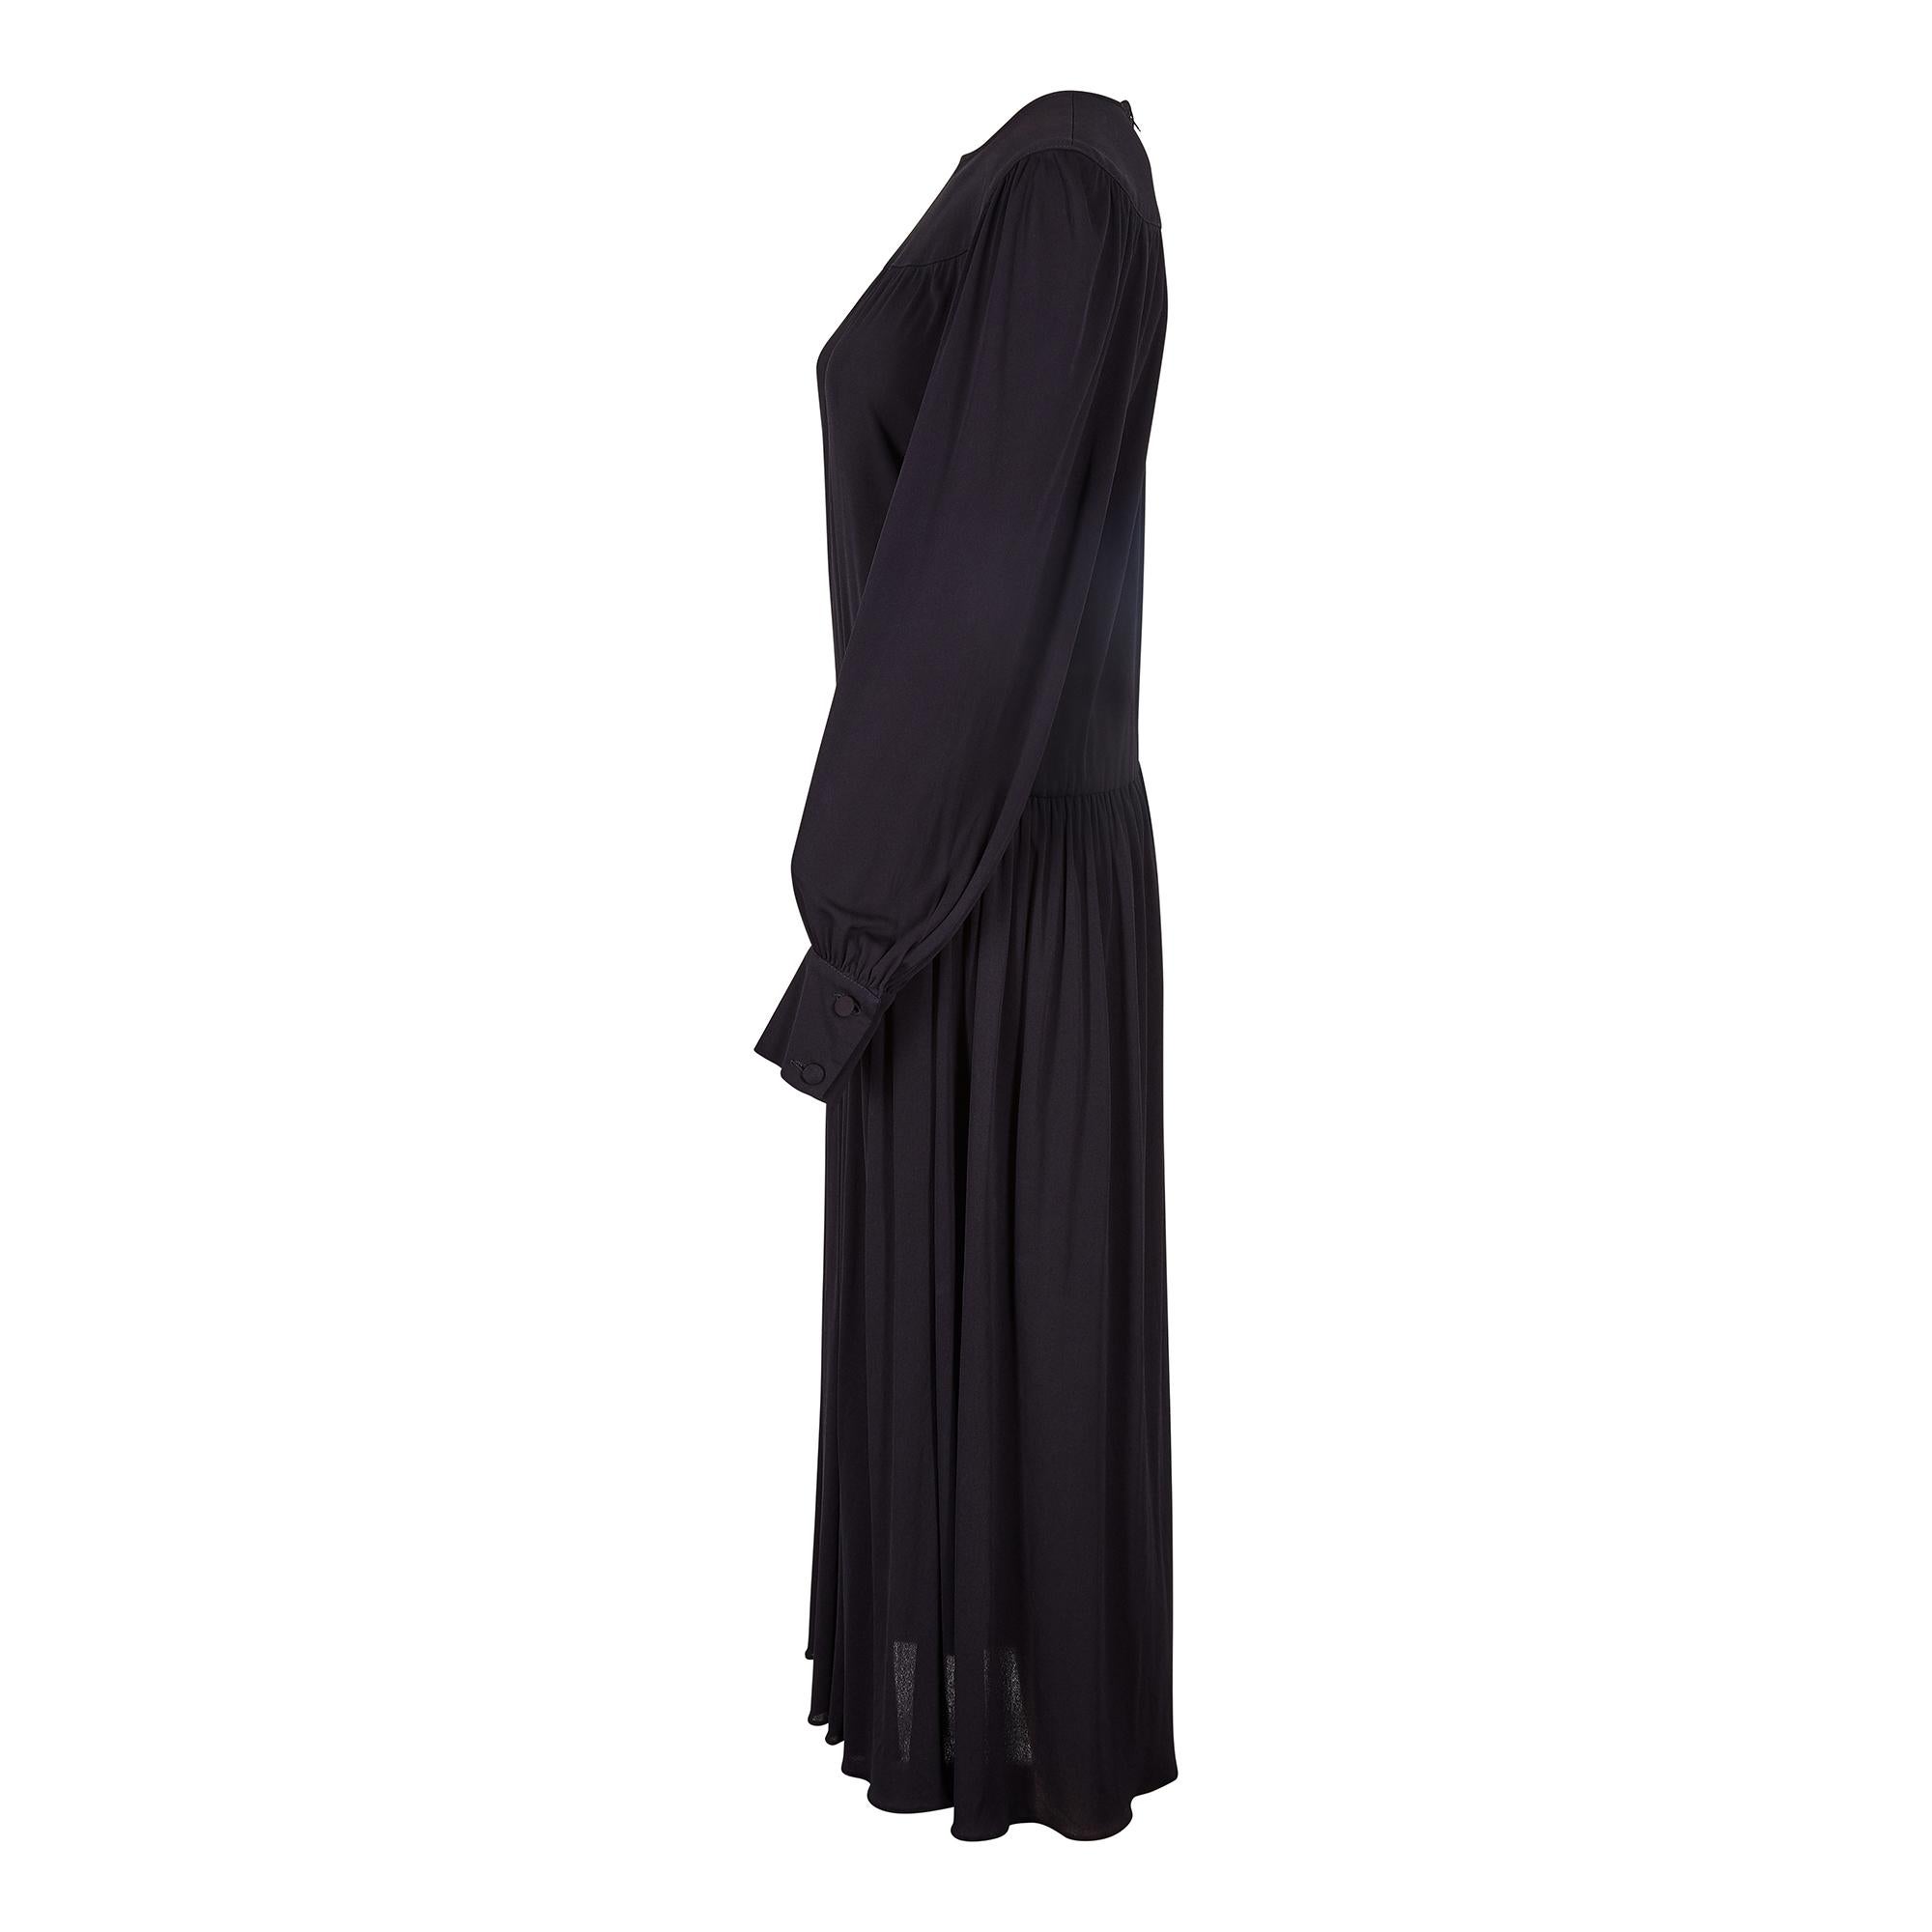 This is a really nice example of quality French wear from Tricosa and is a chic looking jersey dress inspired by Yves Saint Laurent’s collections of the mid-70s. It has a wide yoke neckline and the sleeves are gently gathered with double cuffs. The